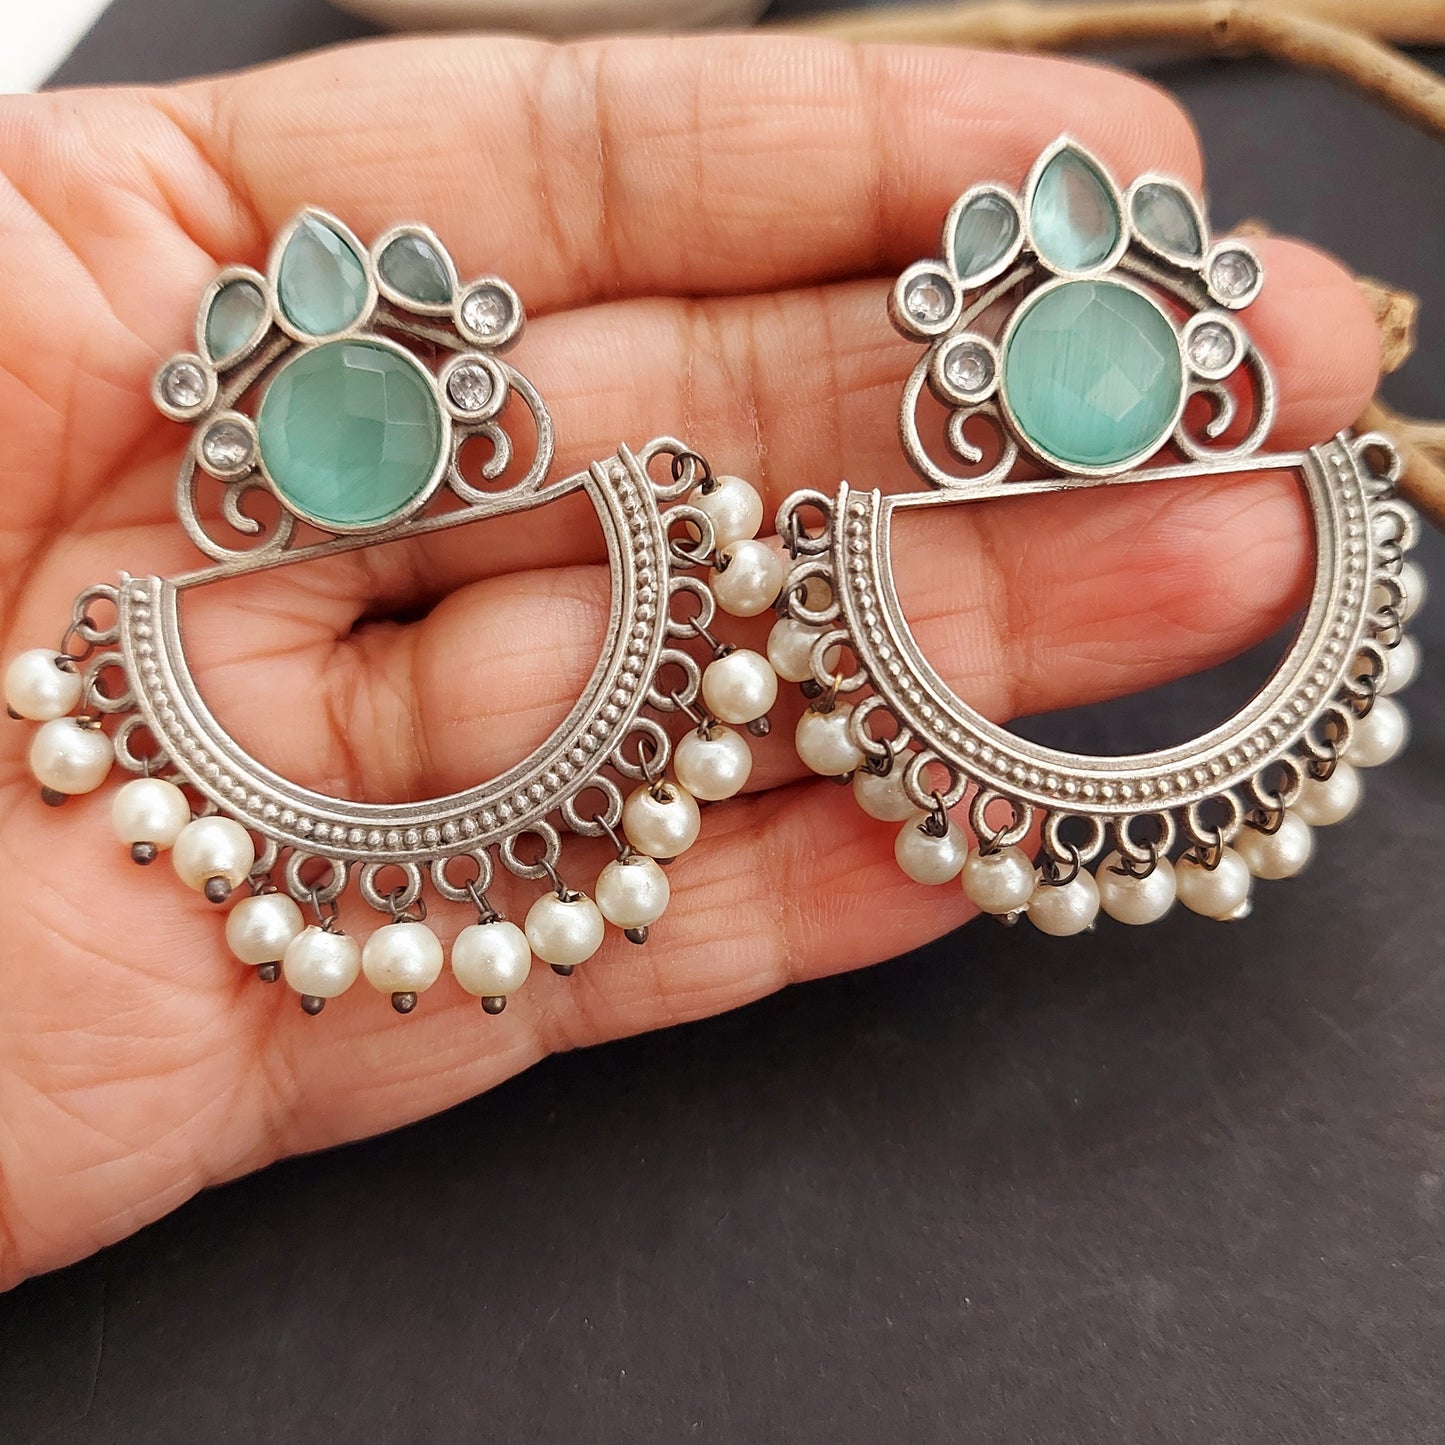 Pastel Green Stoned Statement Earrings with Pearl Danglers